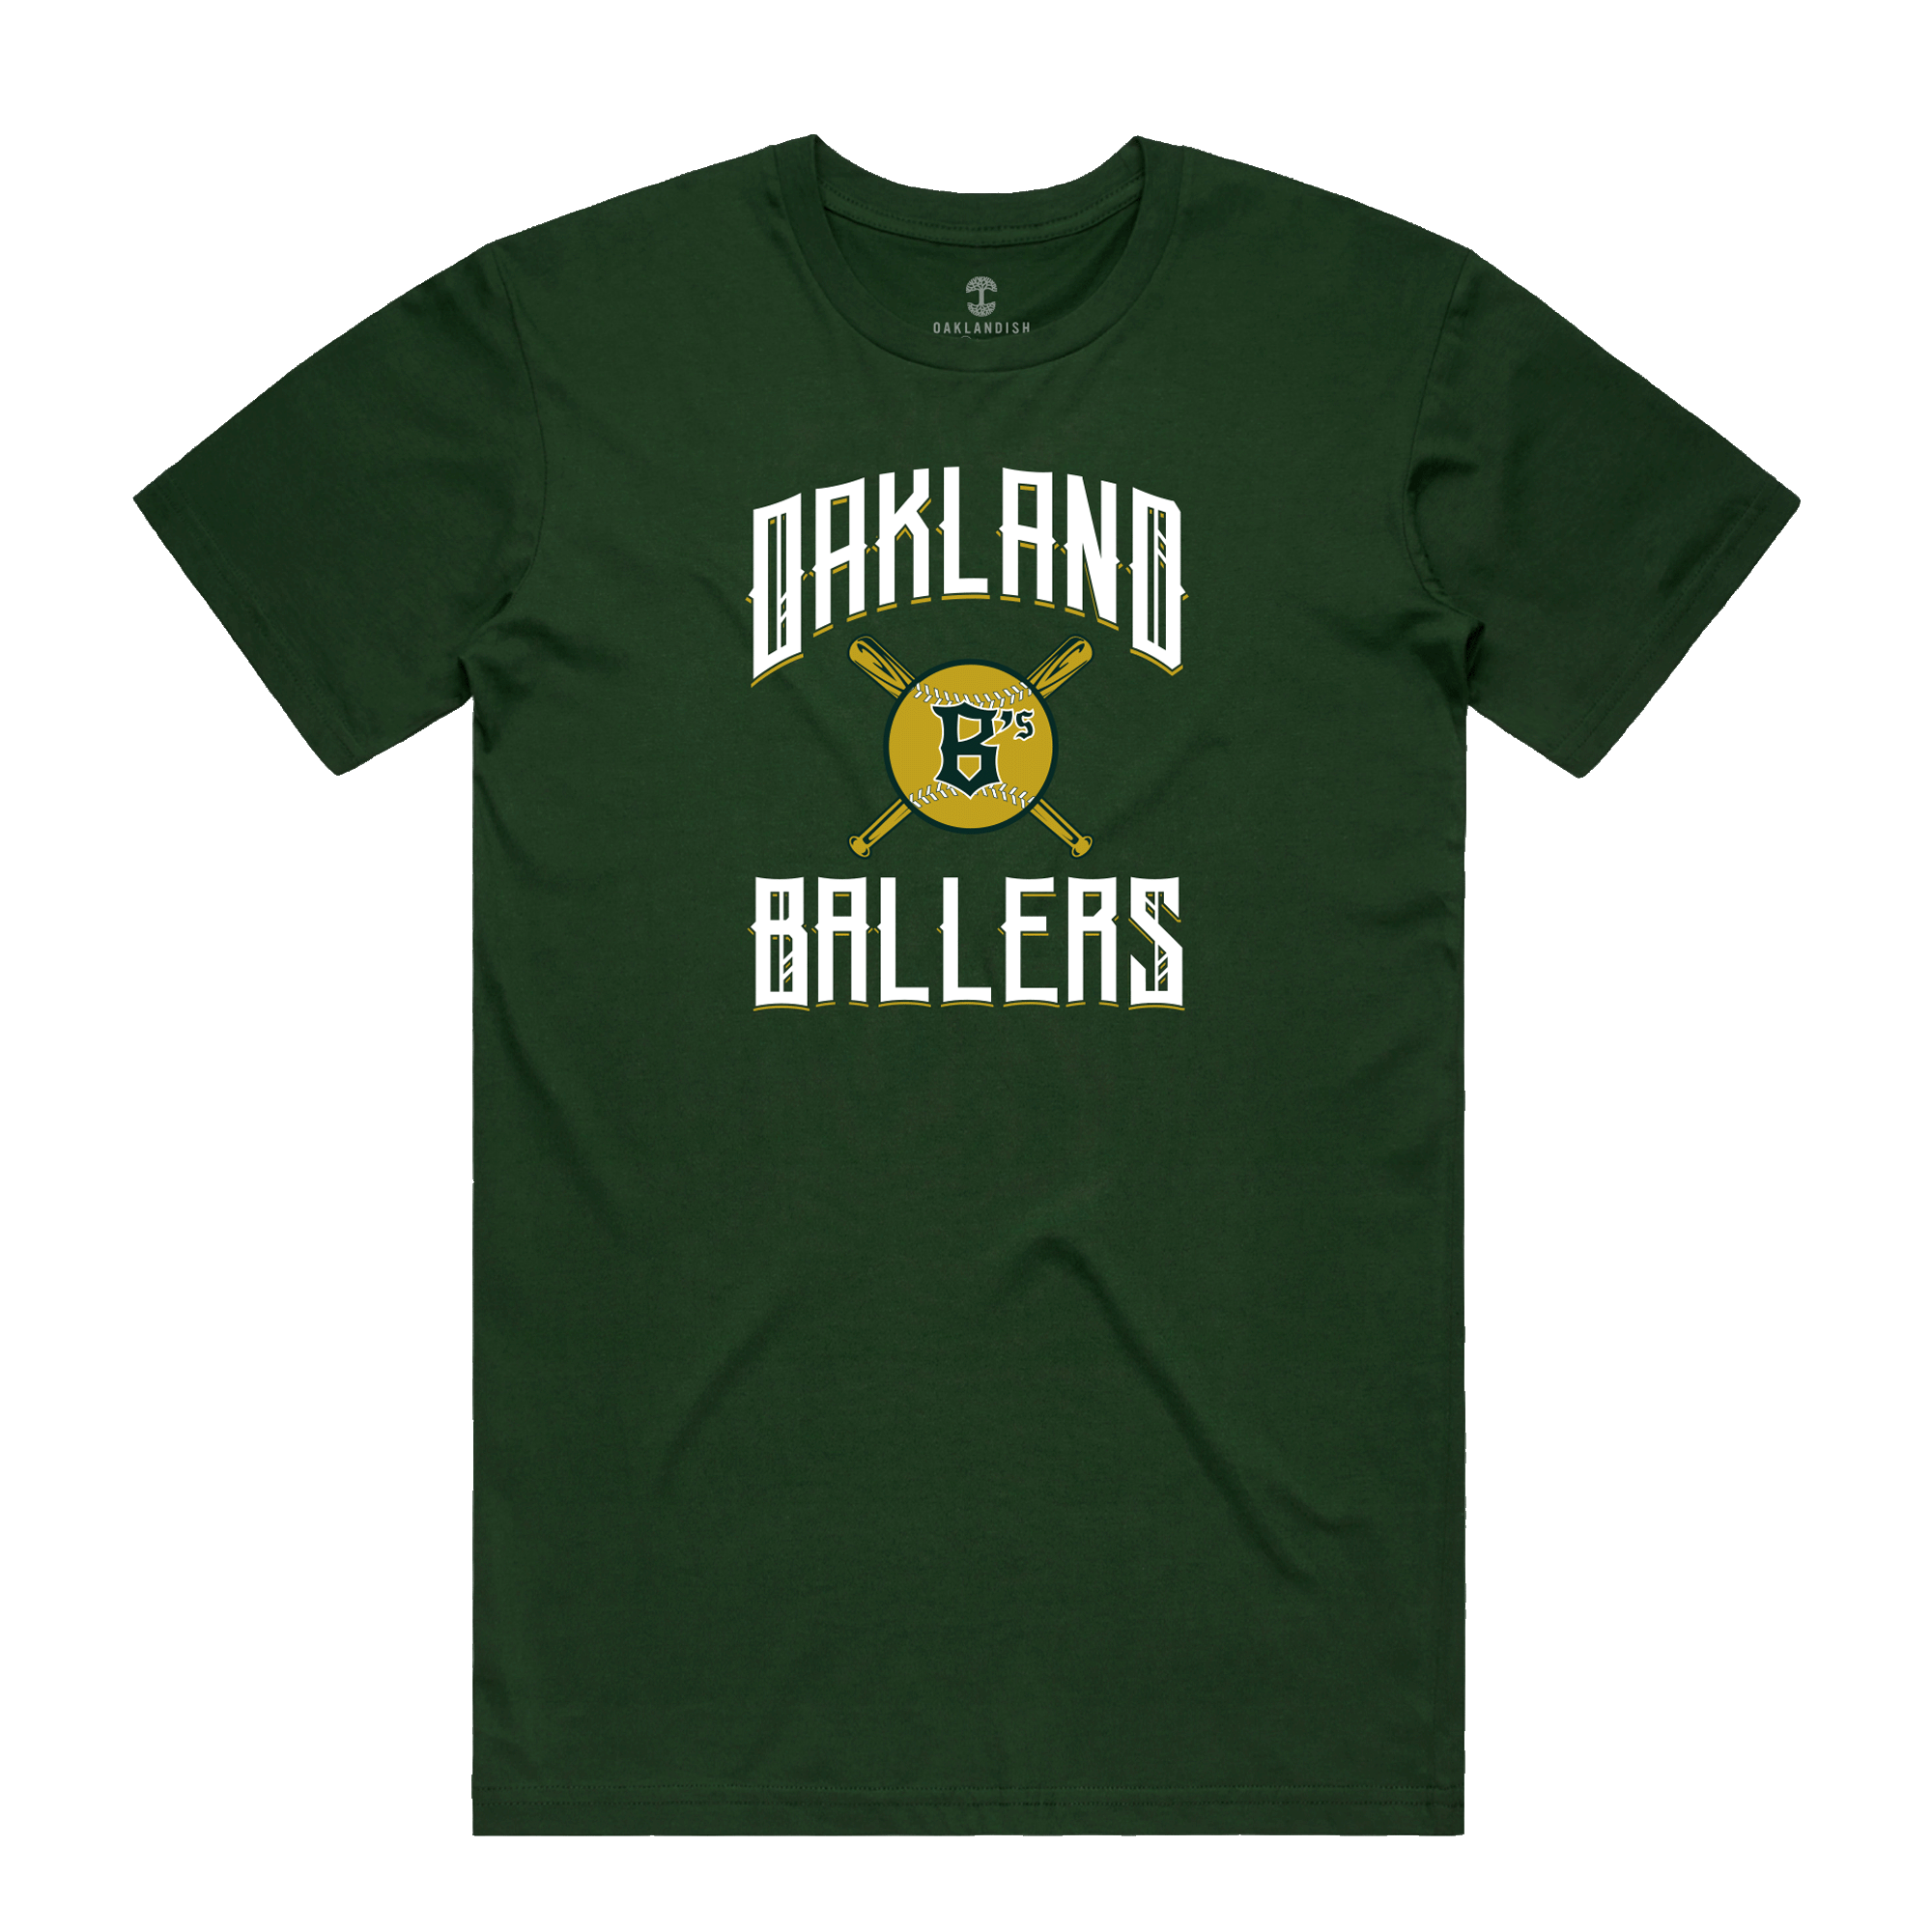 Front view of forest green t-shirt with Oakland B's Oakland Ballers logo on chest.